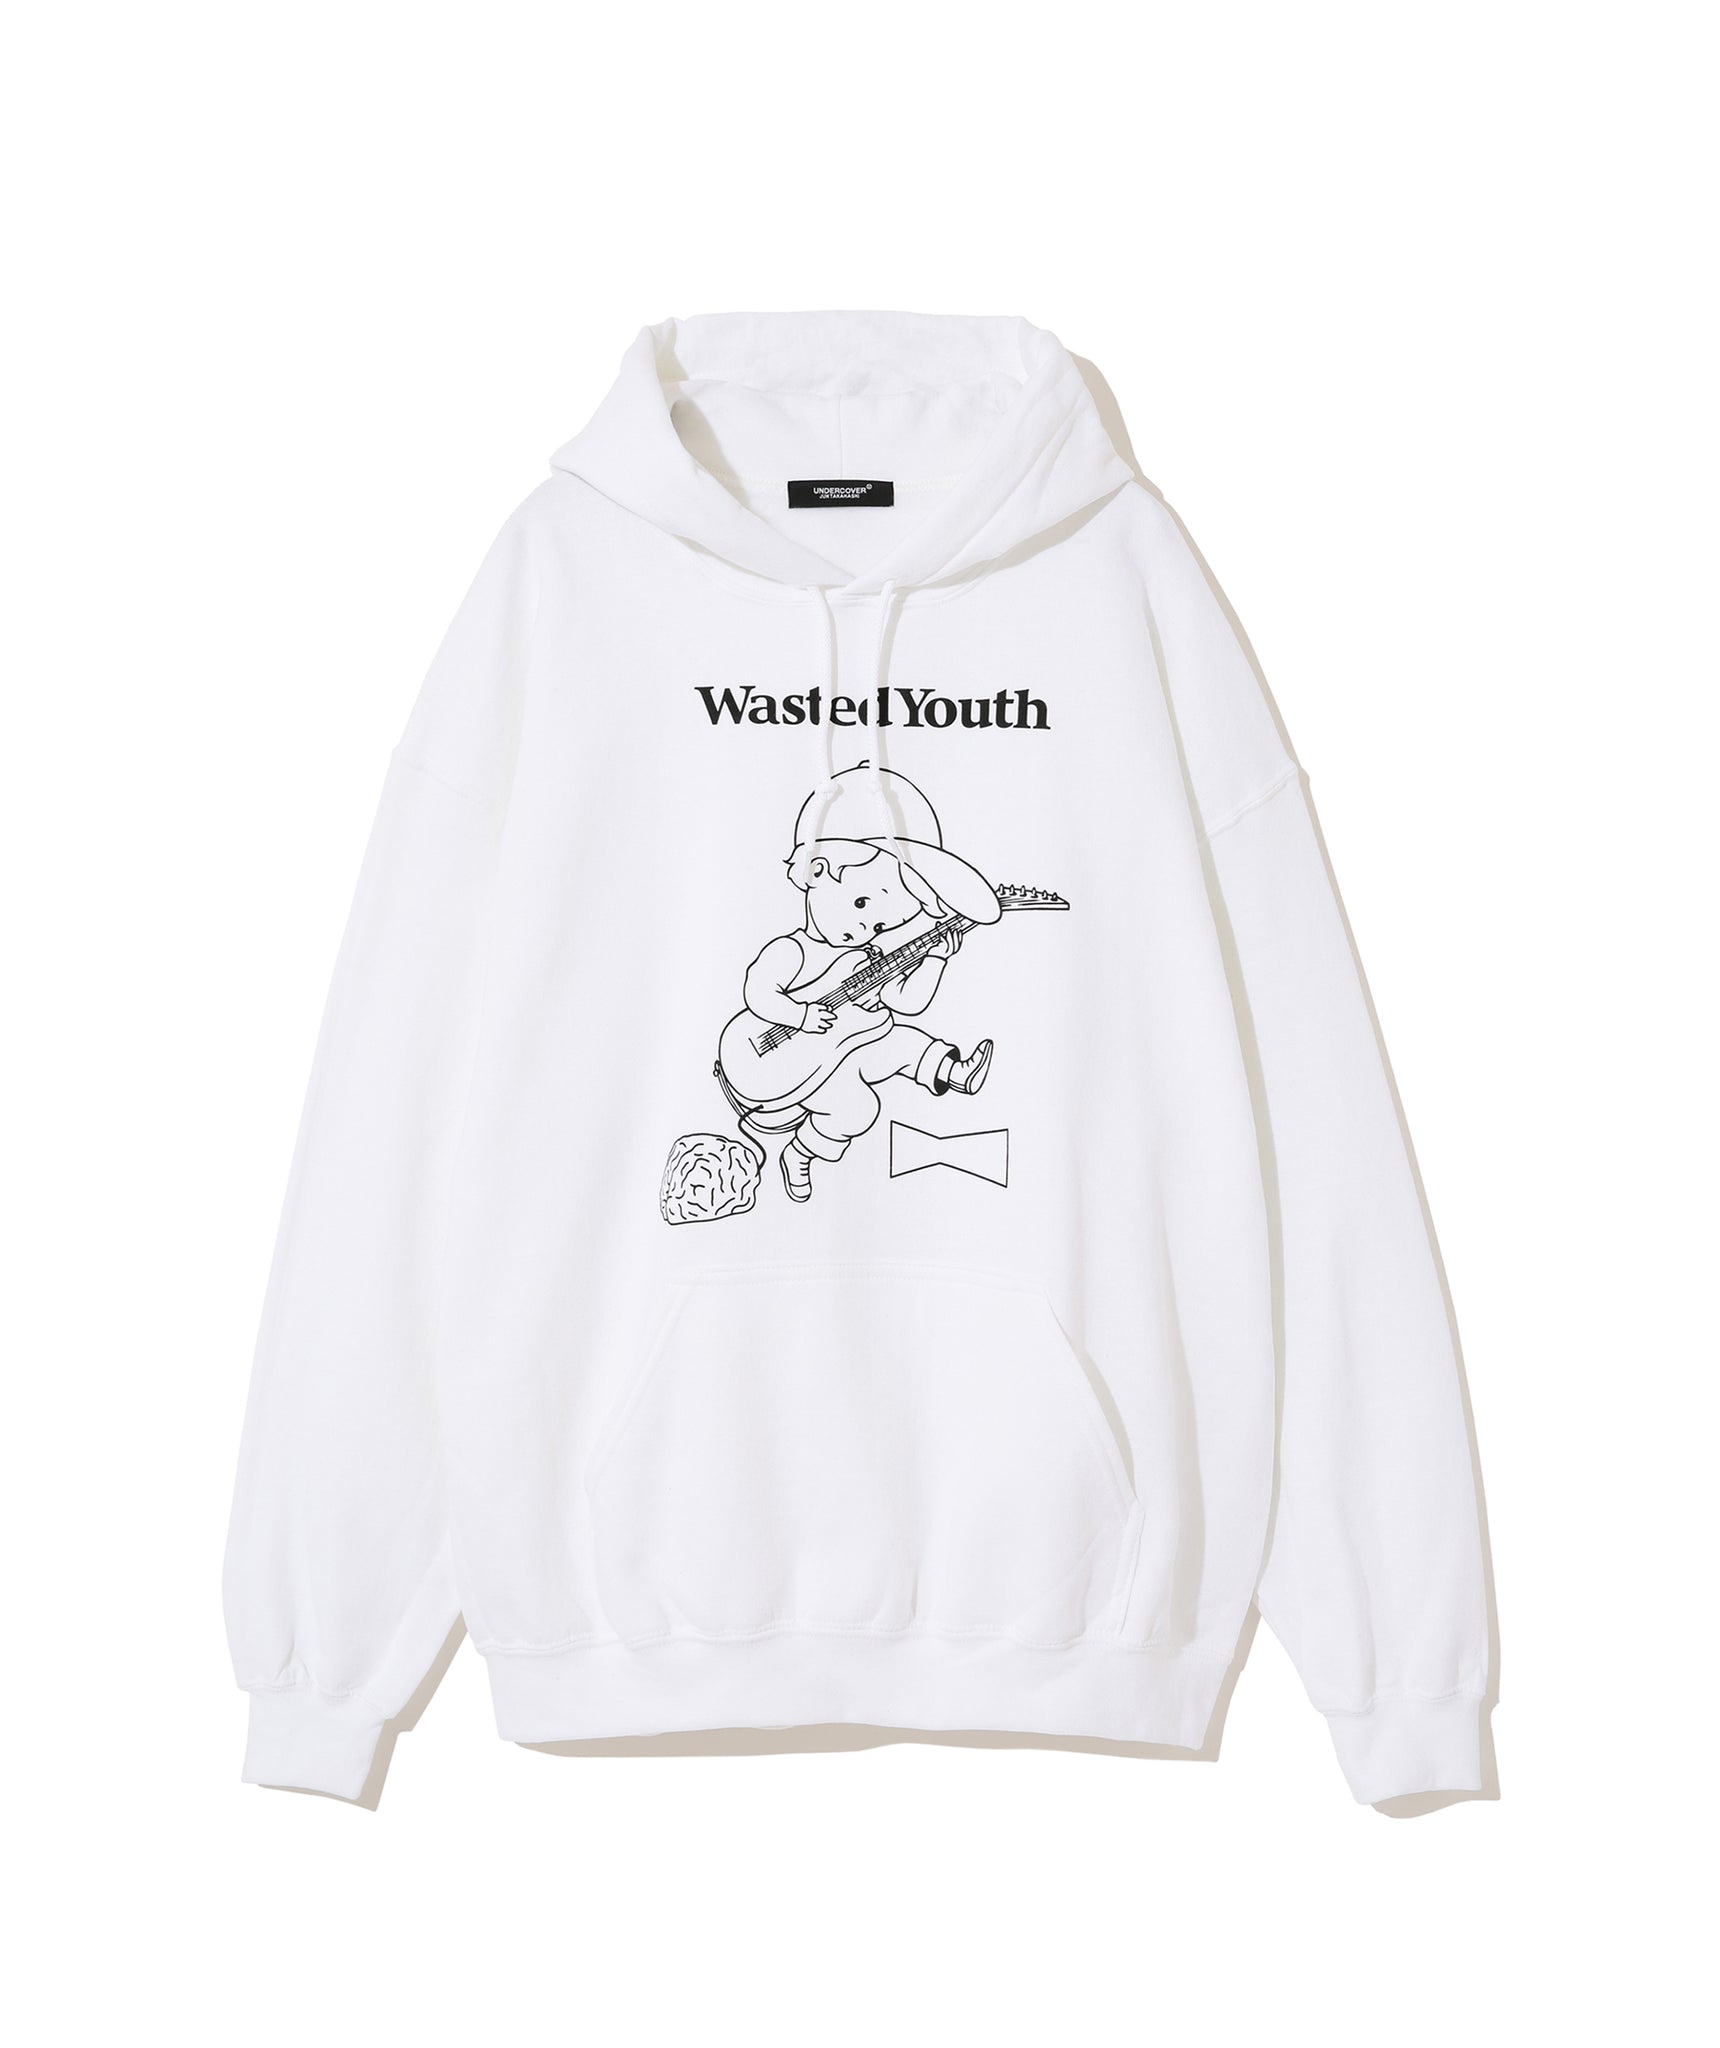 UNDERCOVER × VERDY Wasted Youthコラボパーカー裏起毛あり - パーカー